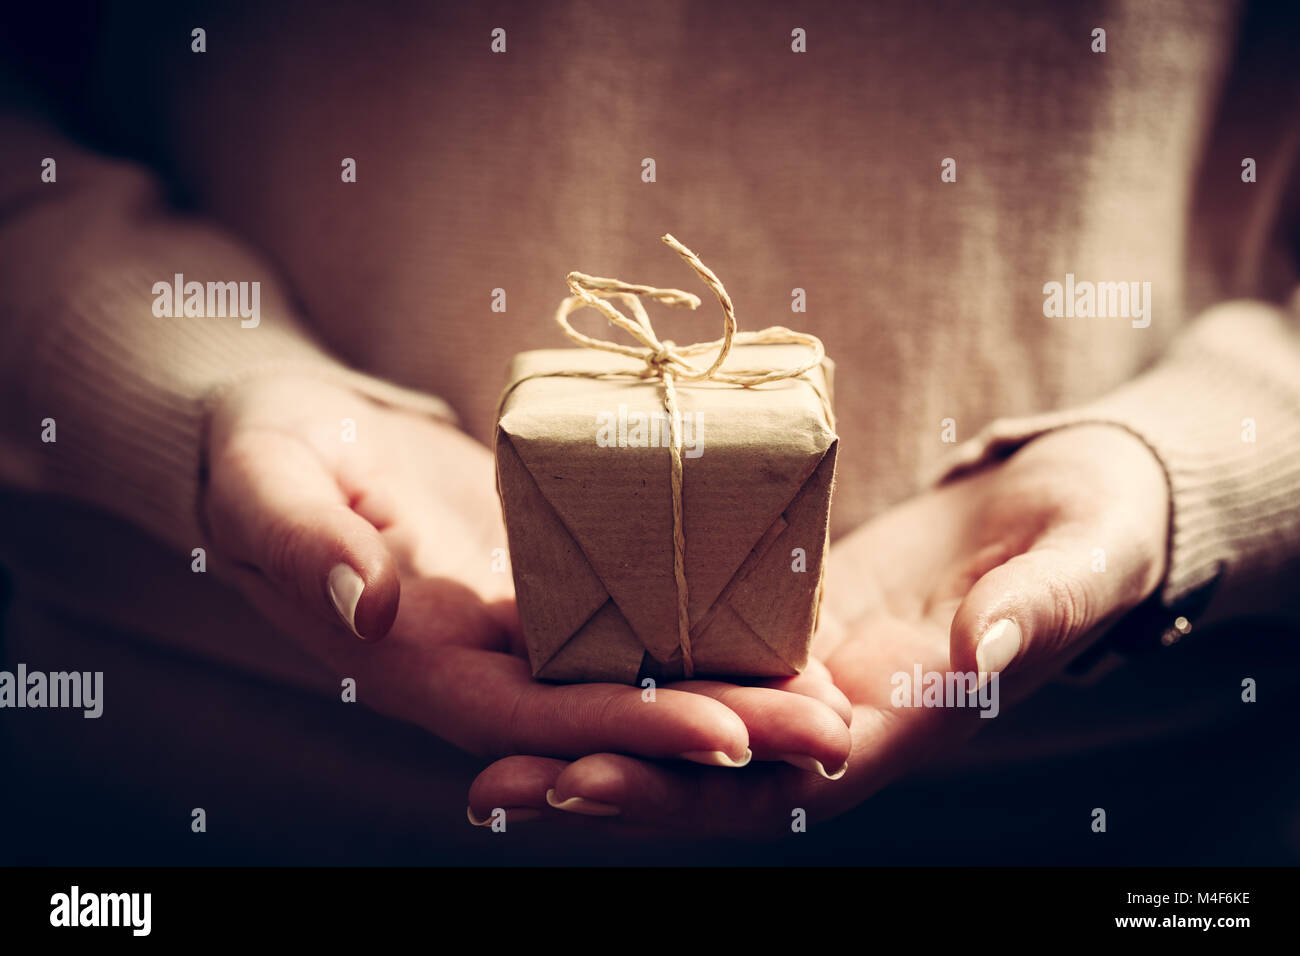 Giving a gift, handmade present wrapped in paper Stock Photo